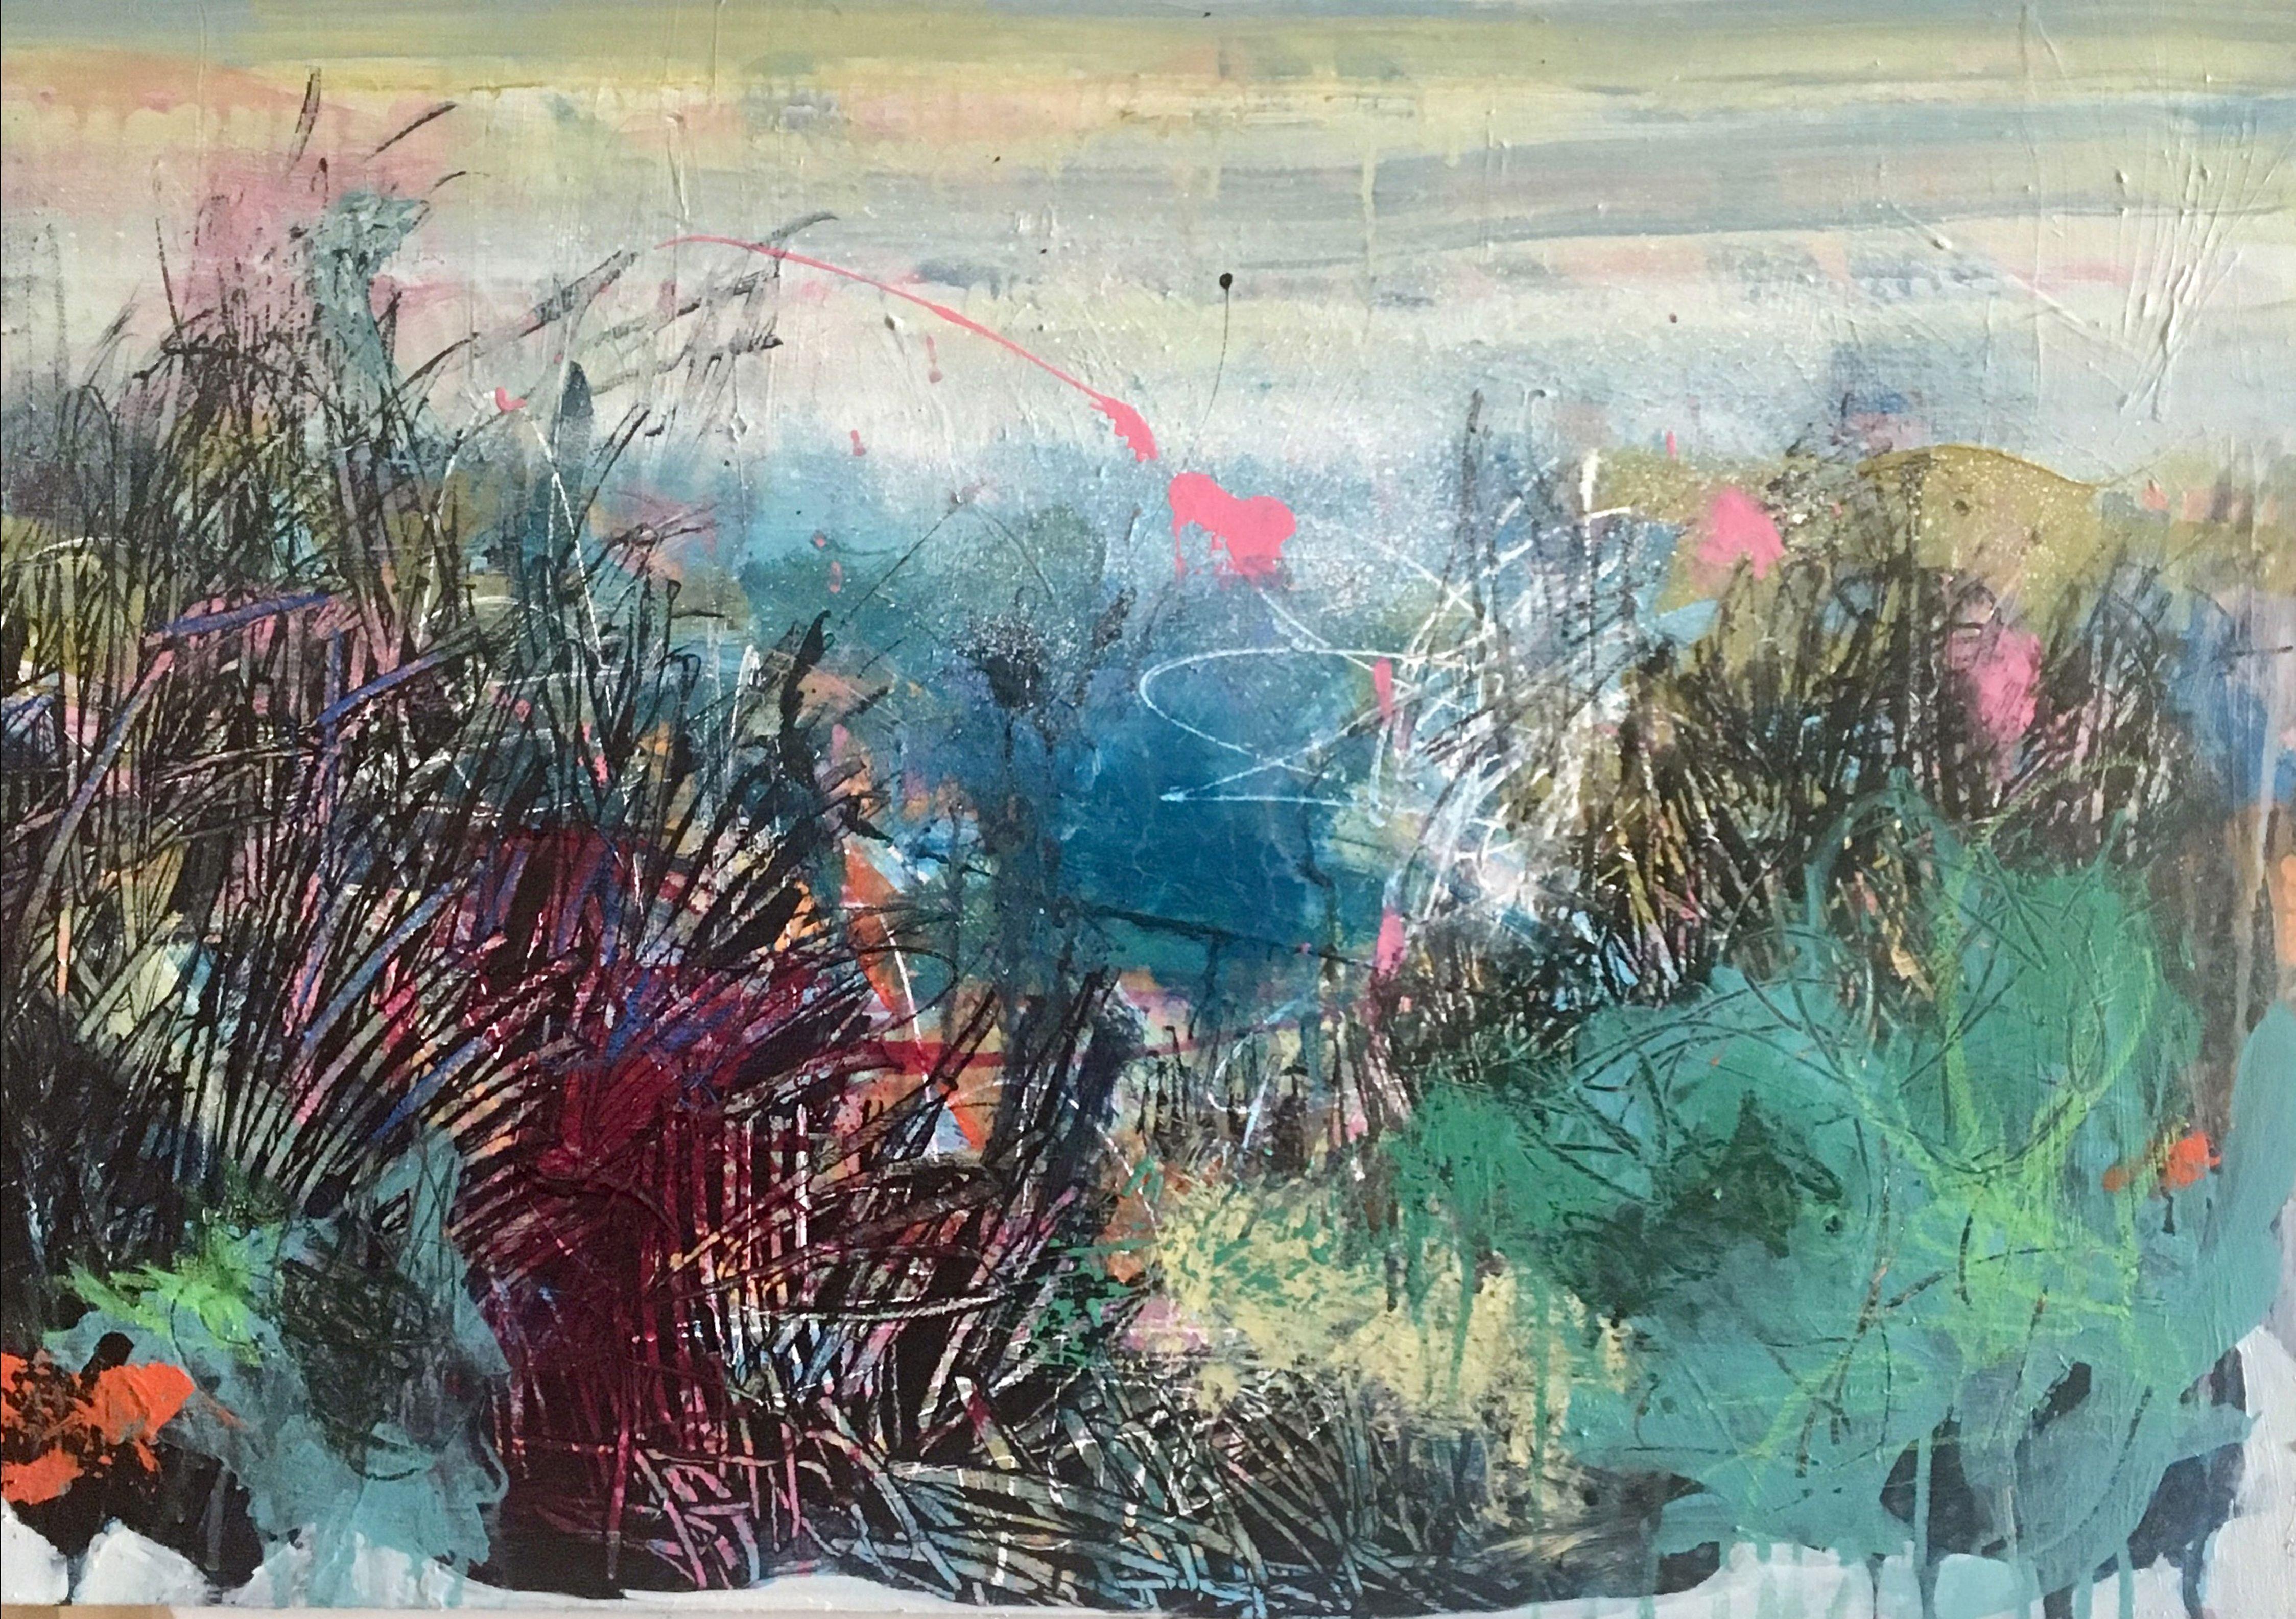 Over the Sand Dune, Mixed Media on Canvas - Mixed Media Art by Theresa Vandenberg Donche